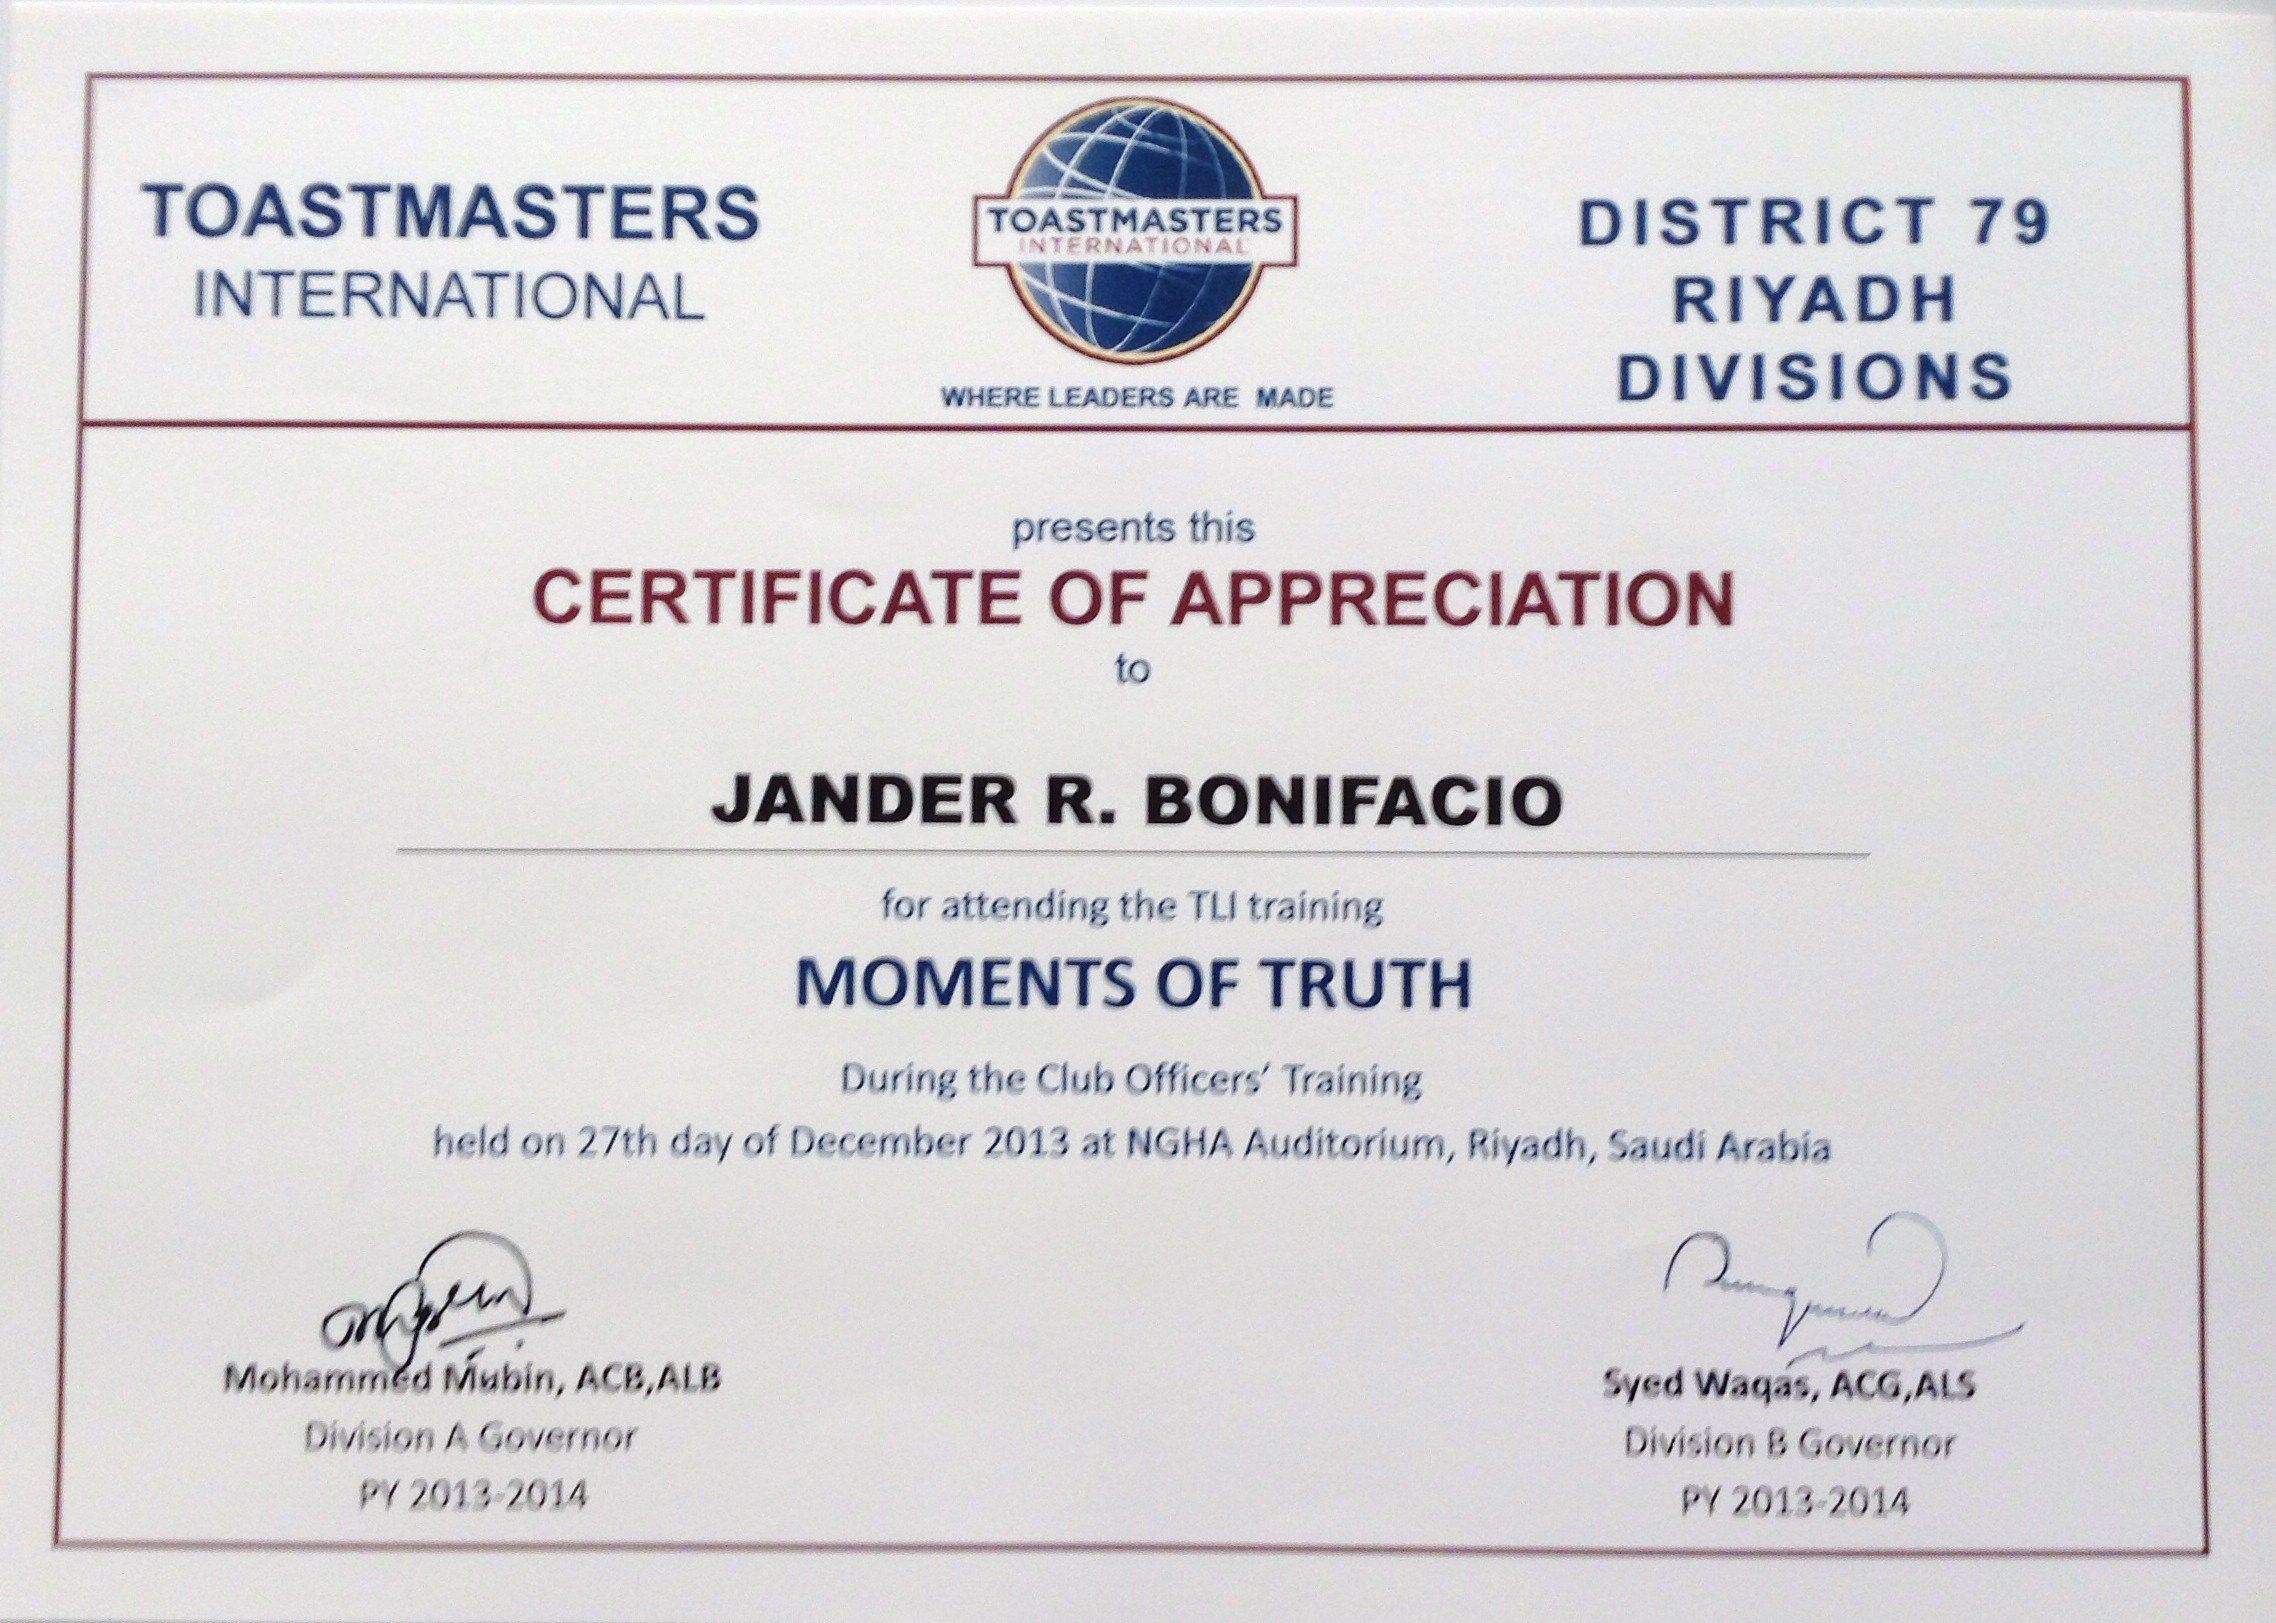 Certificate Of Appreciation Toastmasters All About Image HD